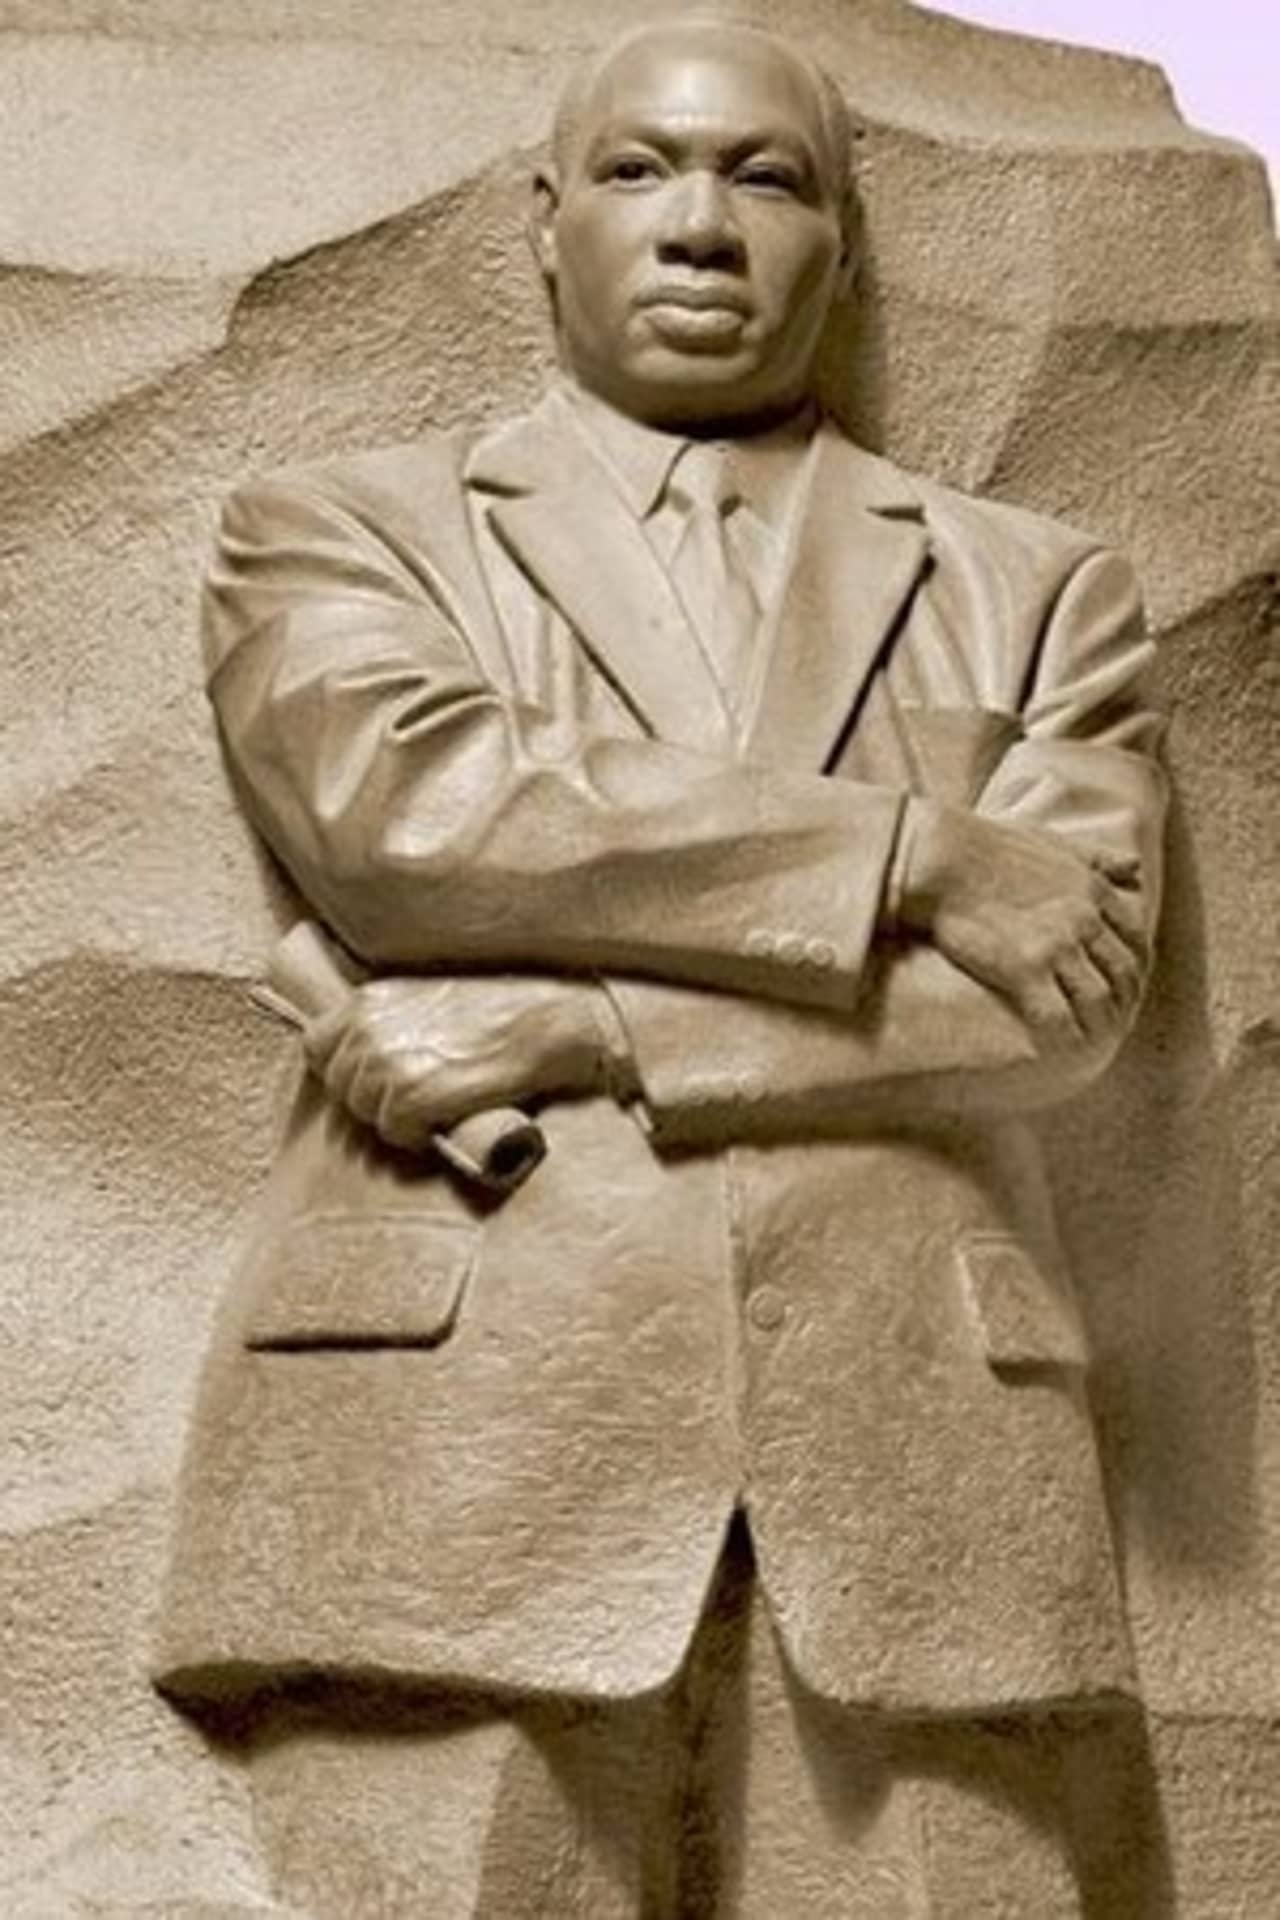 Several offices will be closed in Ossining on Monday, Jan. 20 in observance of Martin Luther King, Jr. Day. 